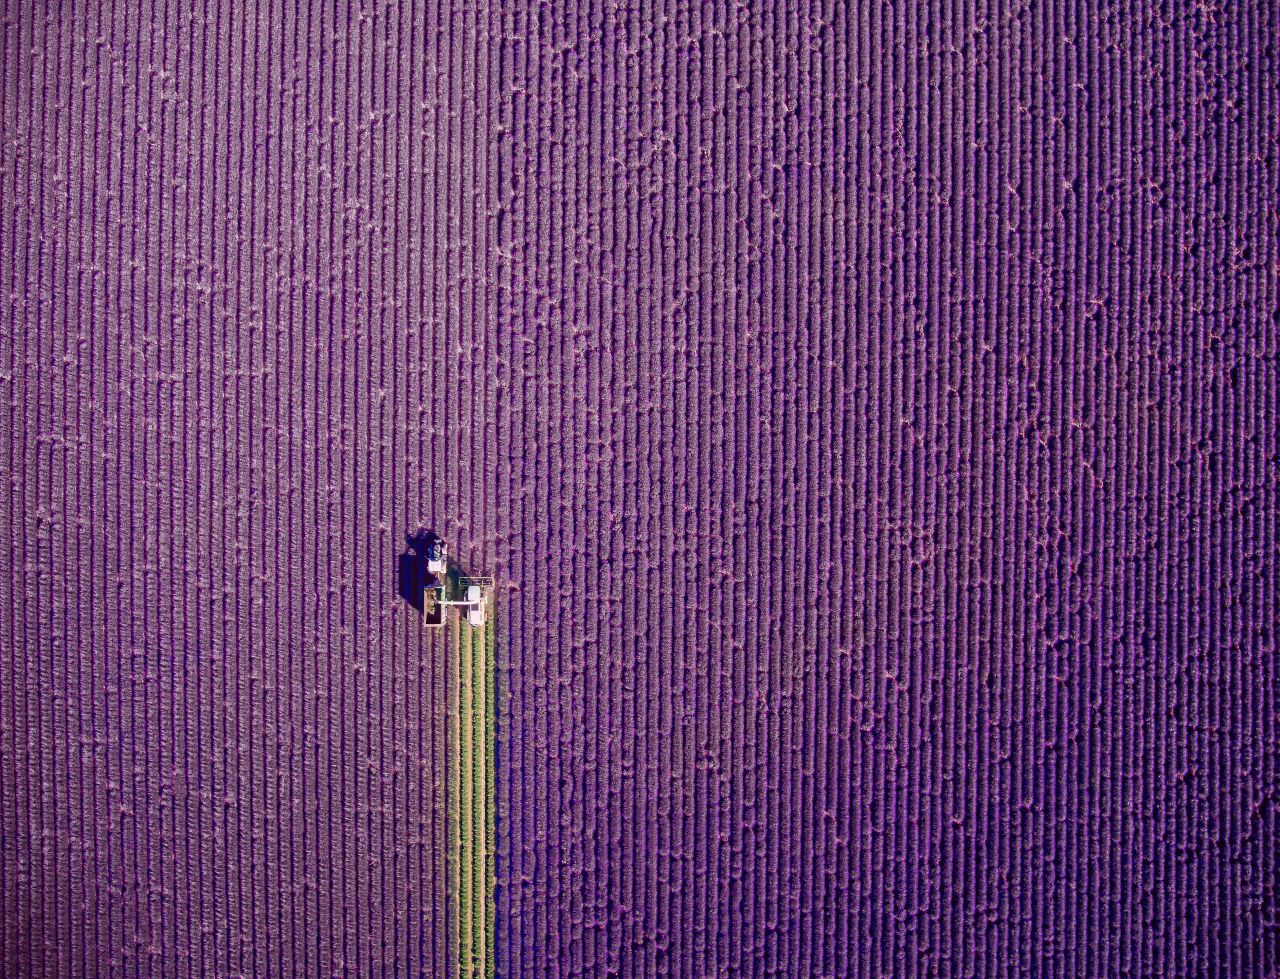 <strong>The world from above:</strong> Dronestagram -- the online site showcasing aerial photography -- has announced the winners of its annual photography competition. The chosen photographs are spectacular birds-eye visions of the world from the sky. This gorgeous image of Provence by user jcourtial won first prize in the nature category.